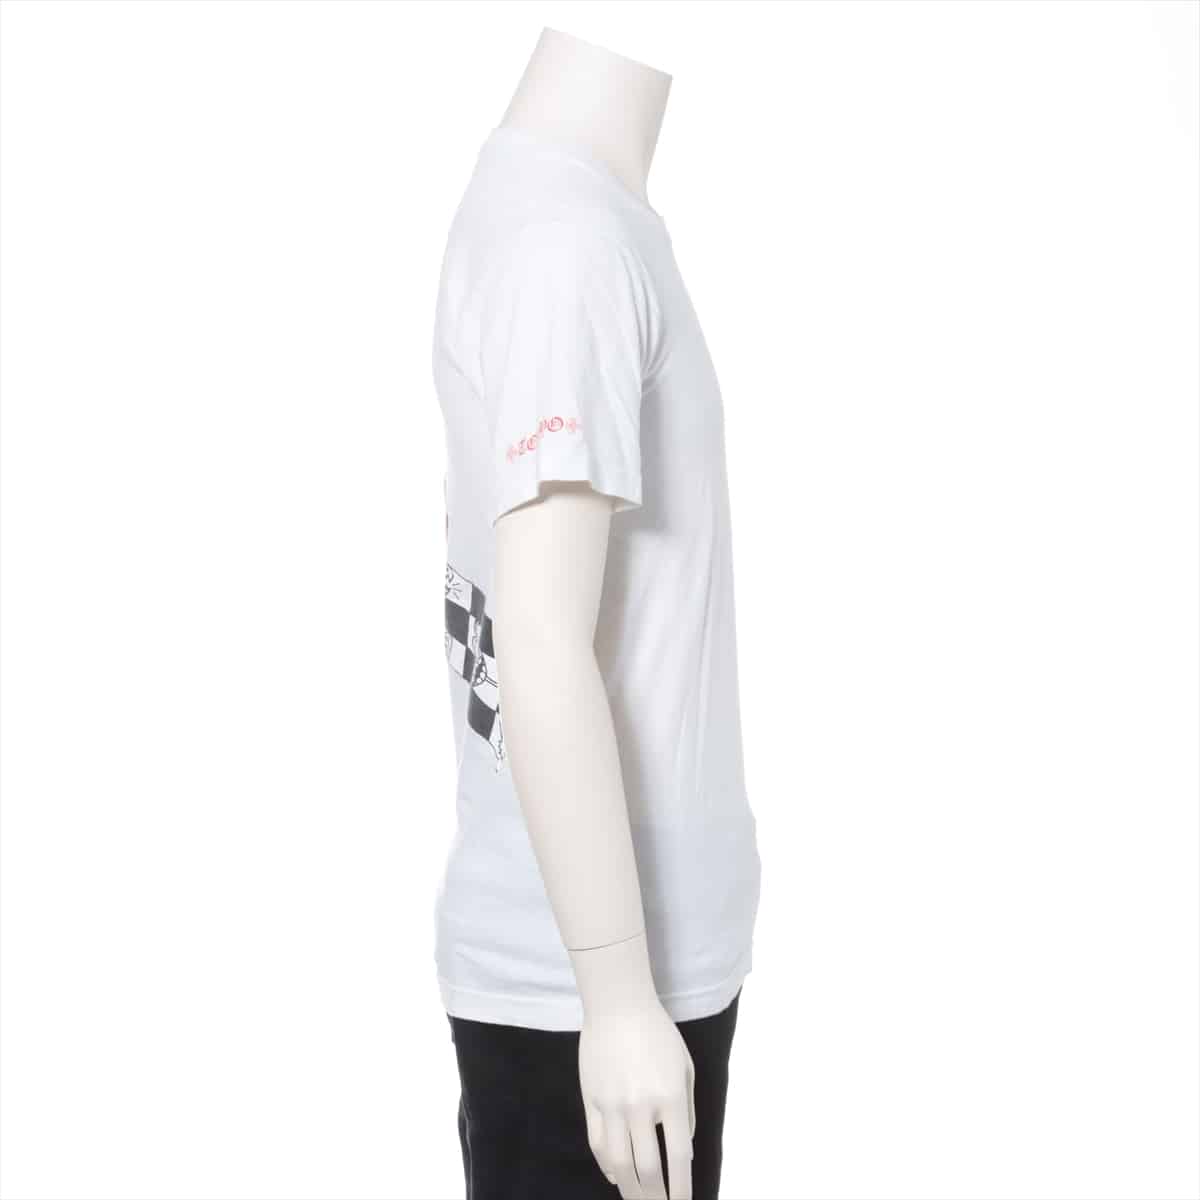 Chrome Hearts Matty Boy T-shirt Cotton White S There is partial color transfer on the back print